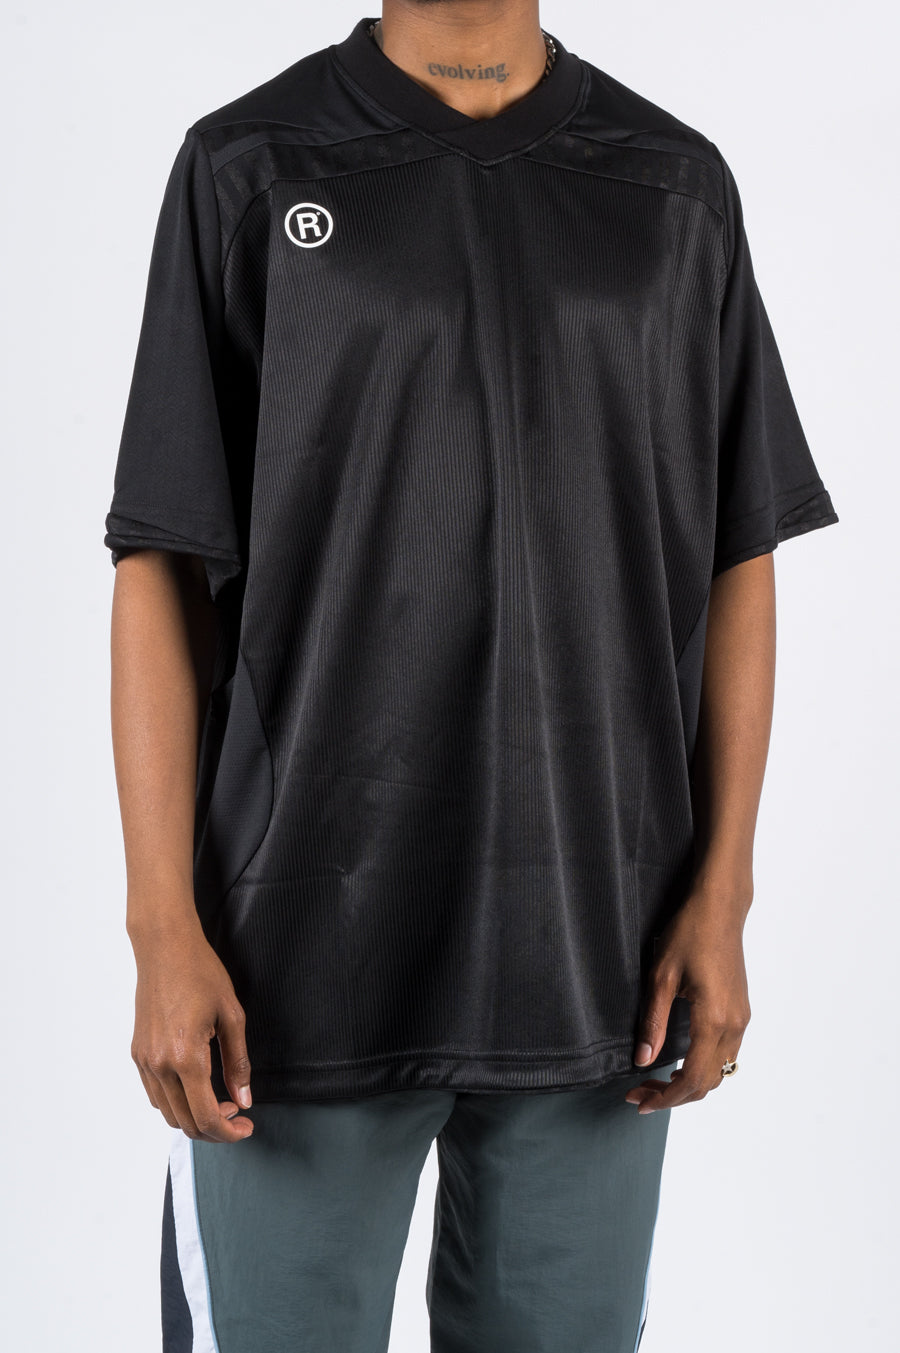 MARTINE ROSE CANDELLA TWO WAY FOOTBALL TOP BLACK - BLENDS